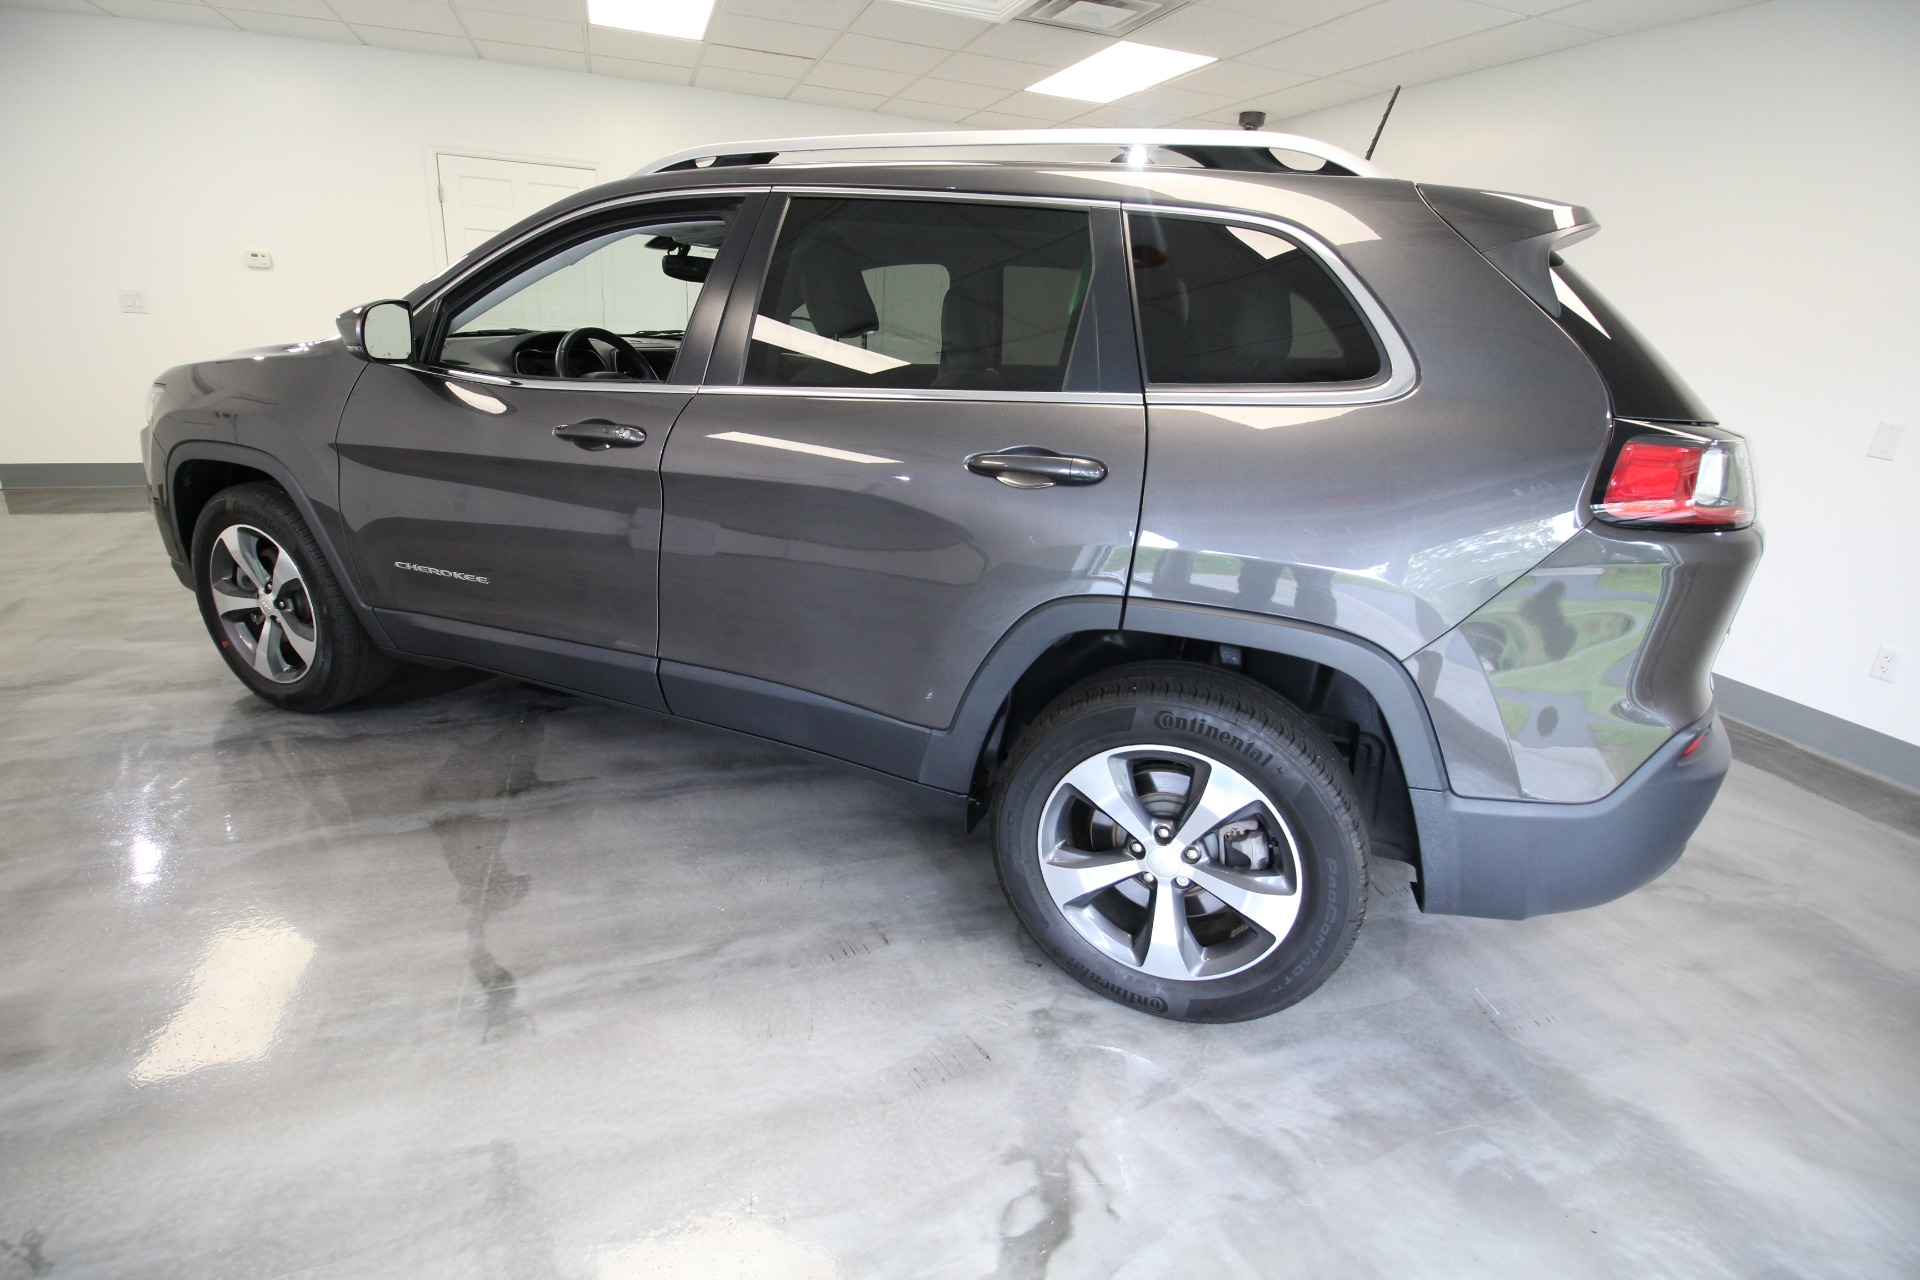 Used 2019 Granite Crystal Metallic Clear Coat Jeep Cherokee Limited 4WD VERY CLEAN AND VERY WELL EQUIPPED | Albany, NY